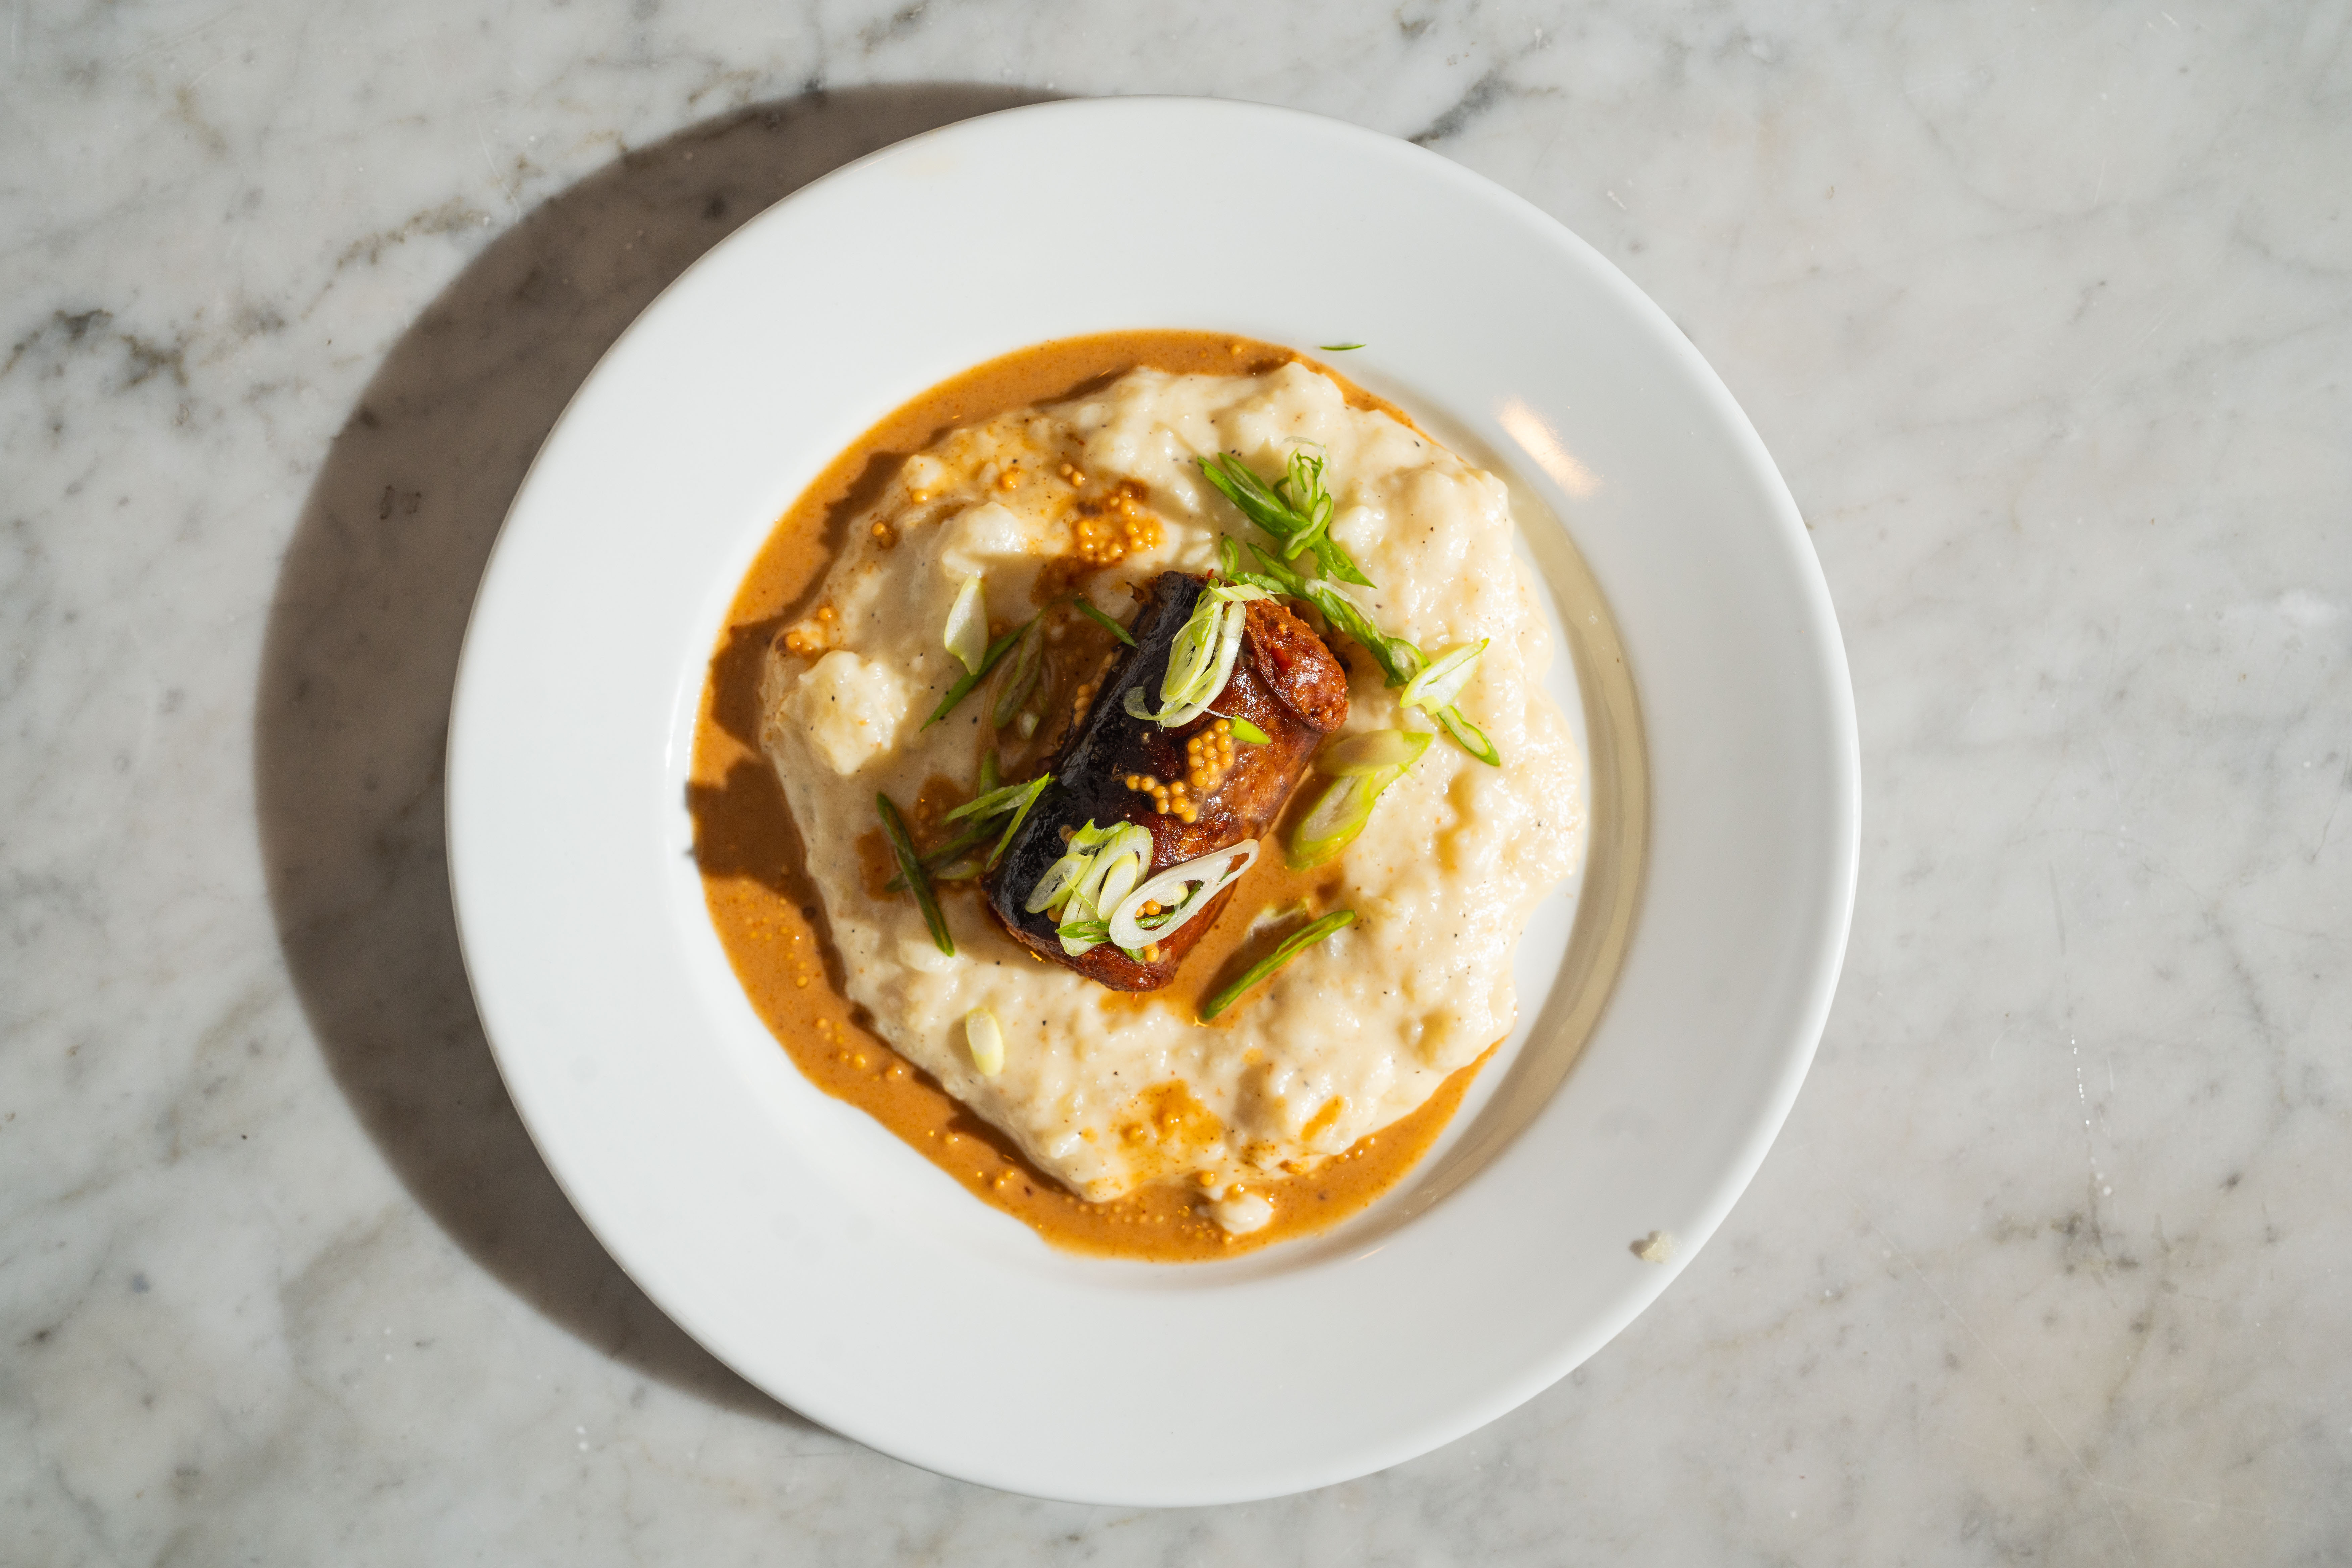 An image of a traditional southern American dish, likely fish and grits.